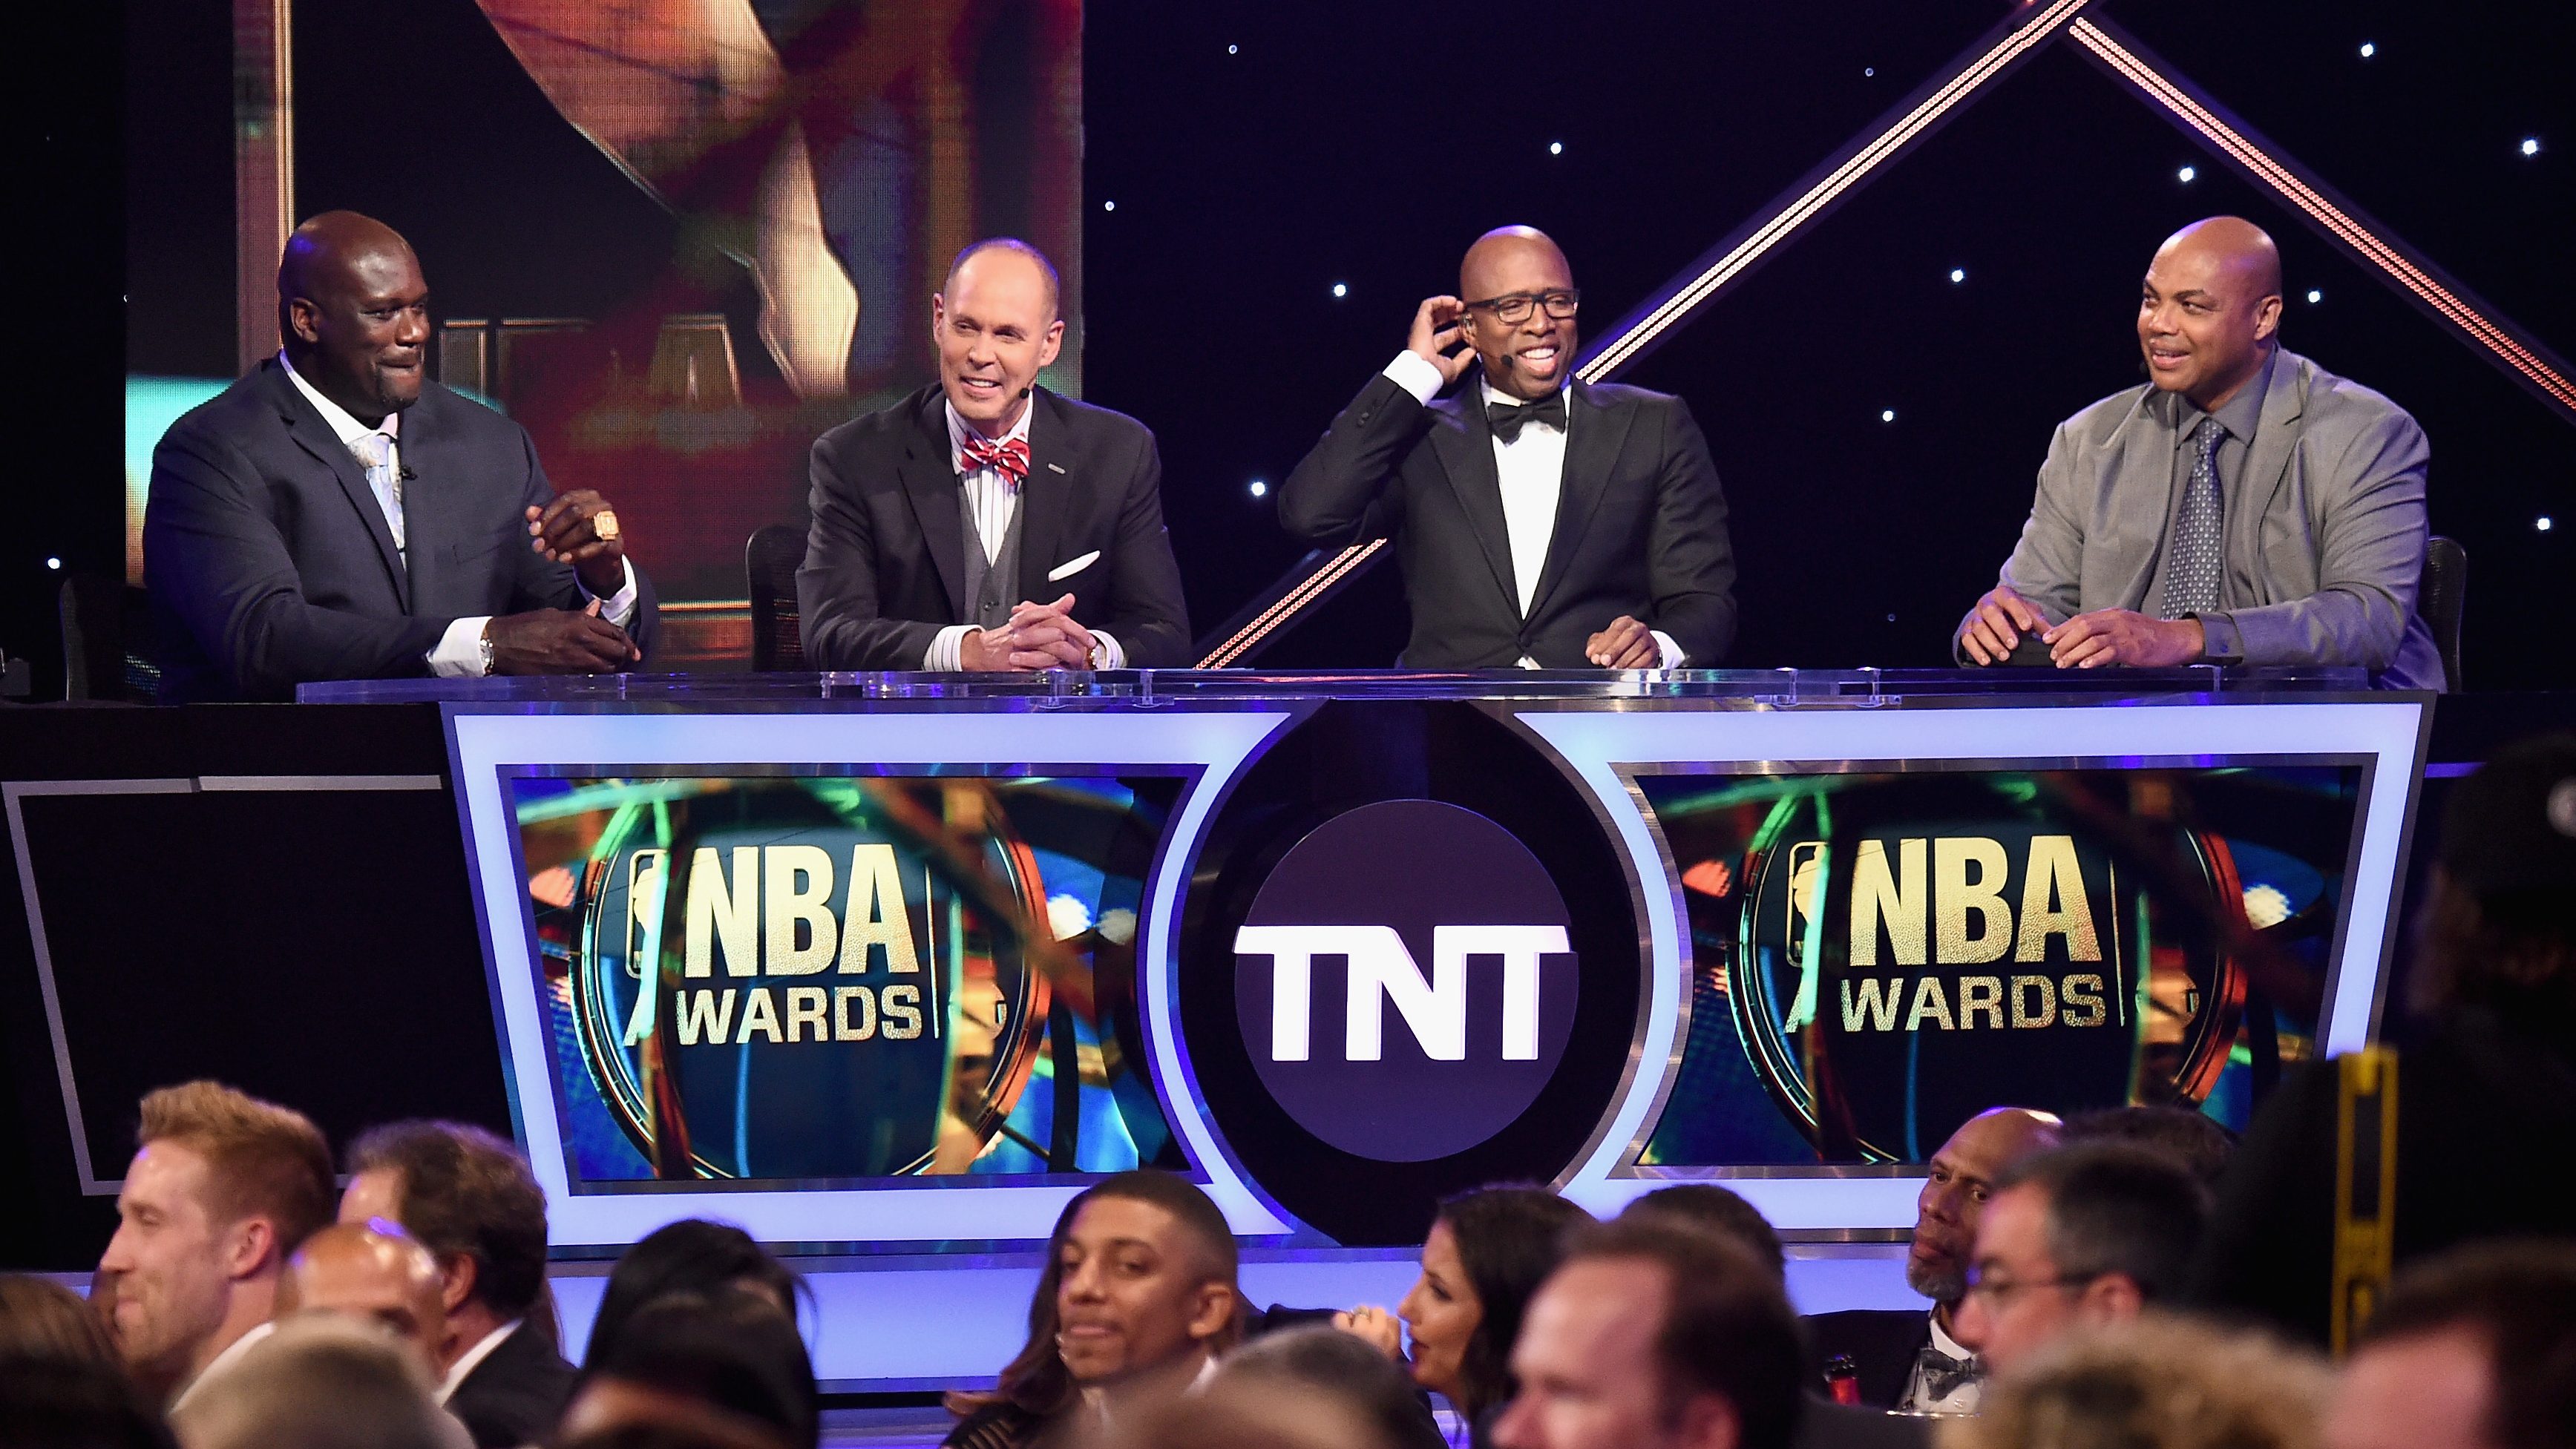 How to Watch NBA on TNT Games Online Without Cable